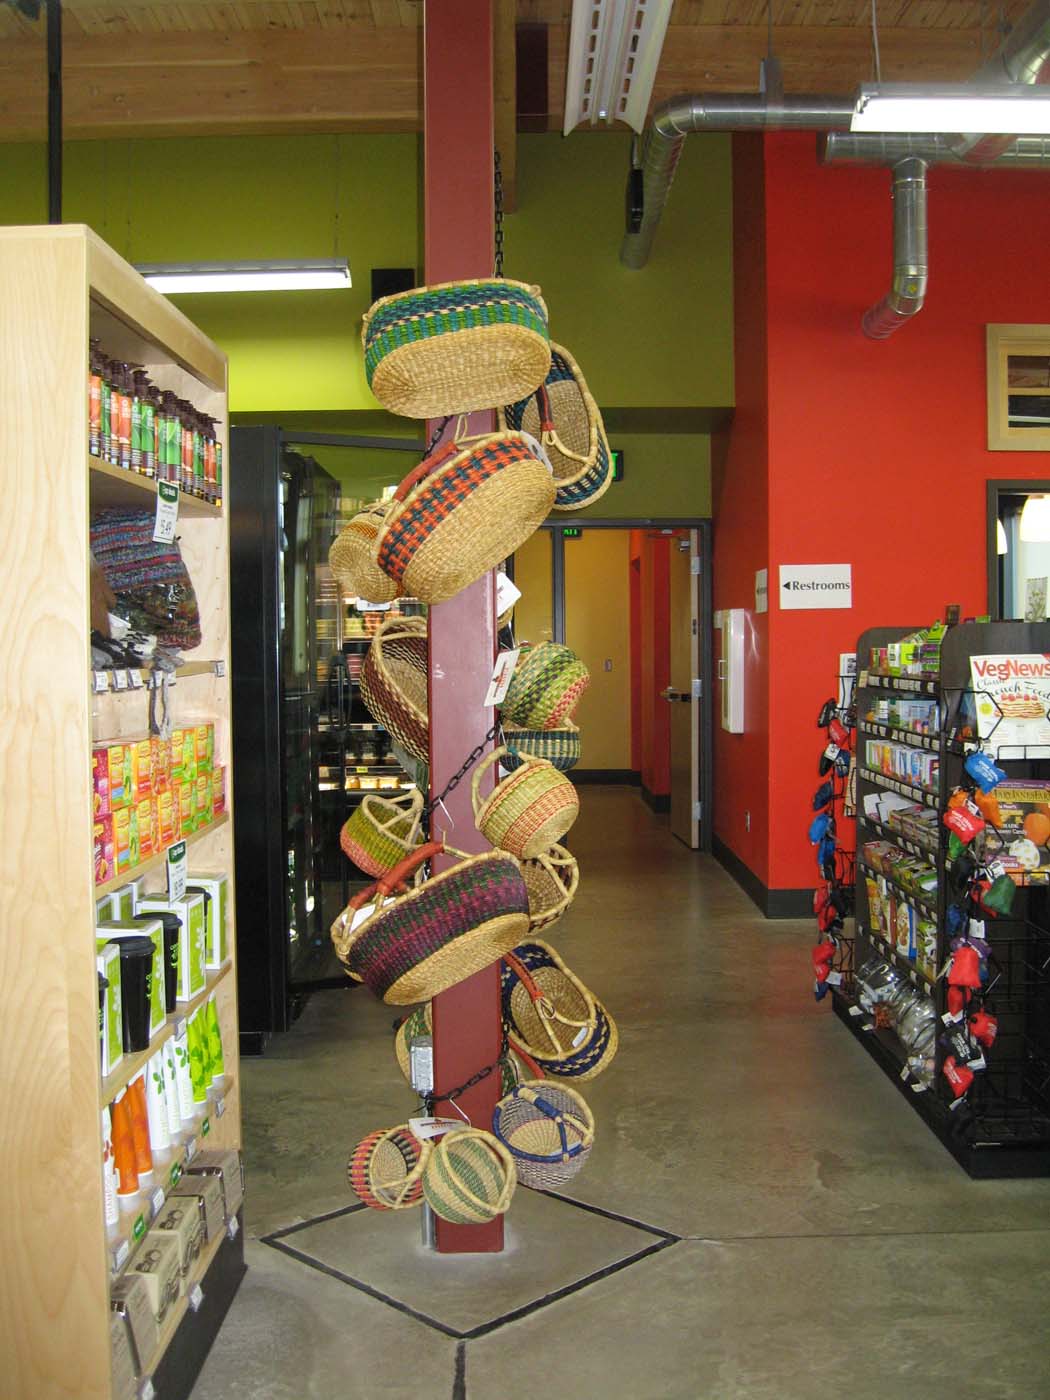 Chain displays allow stores to maximize their merchandising space